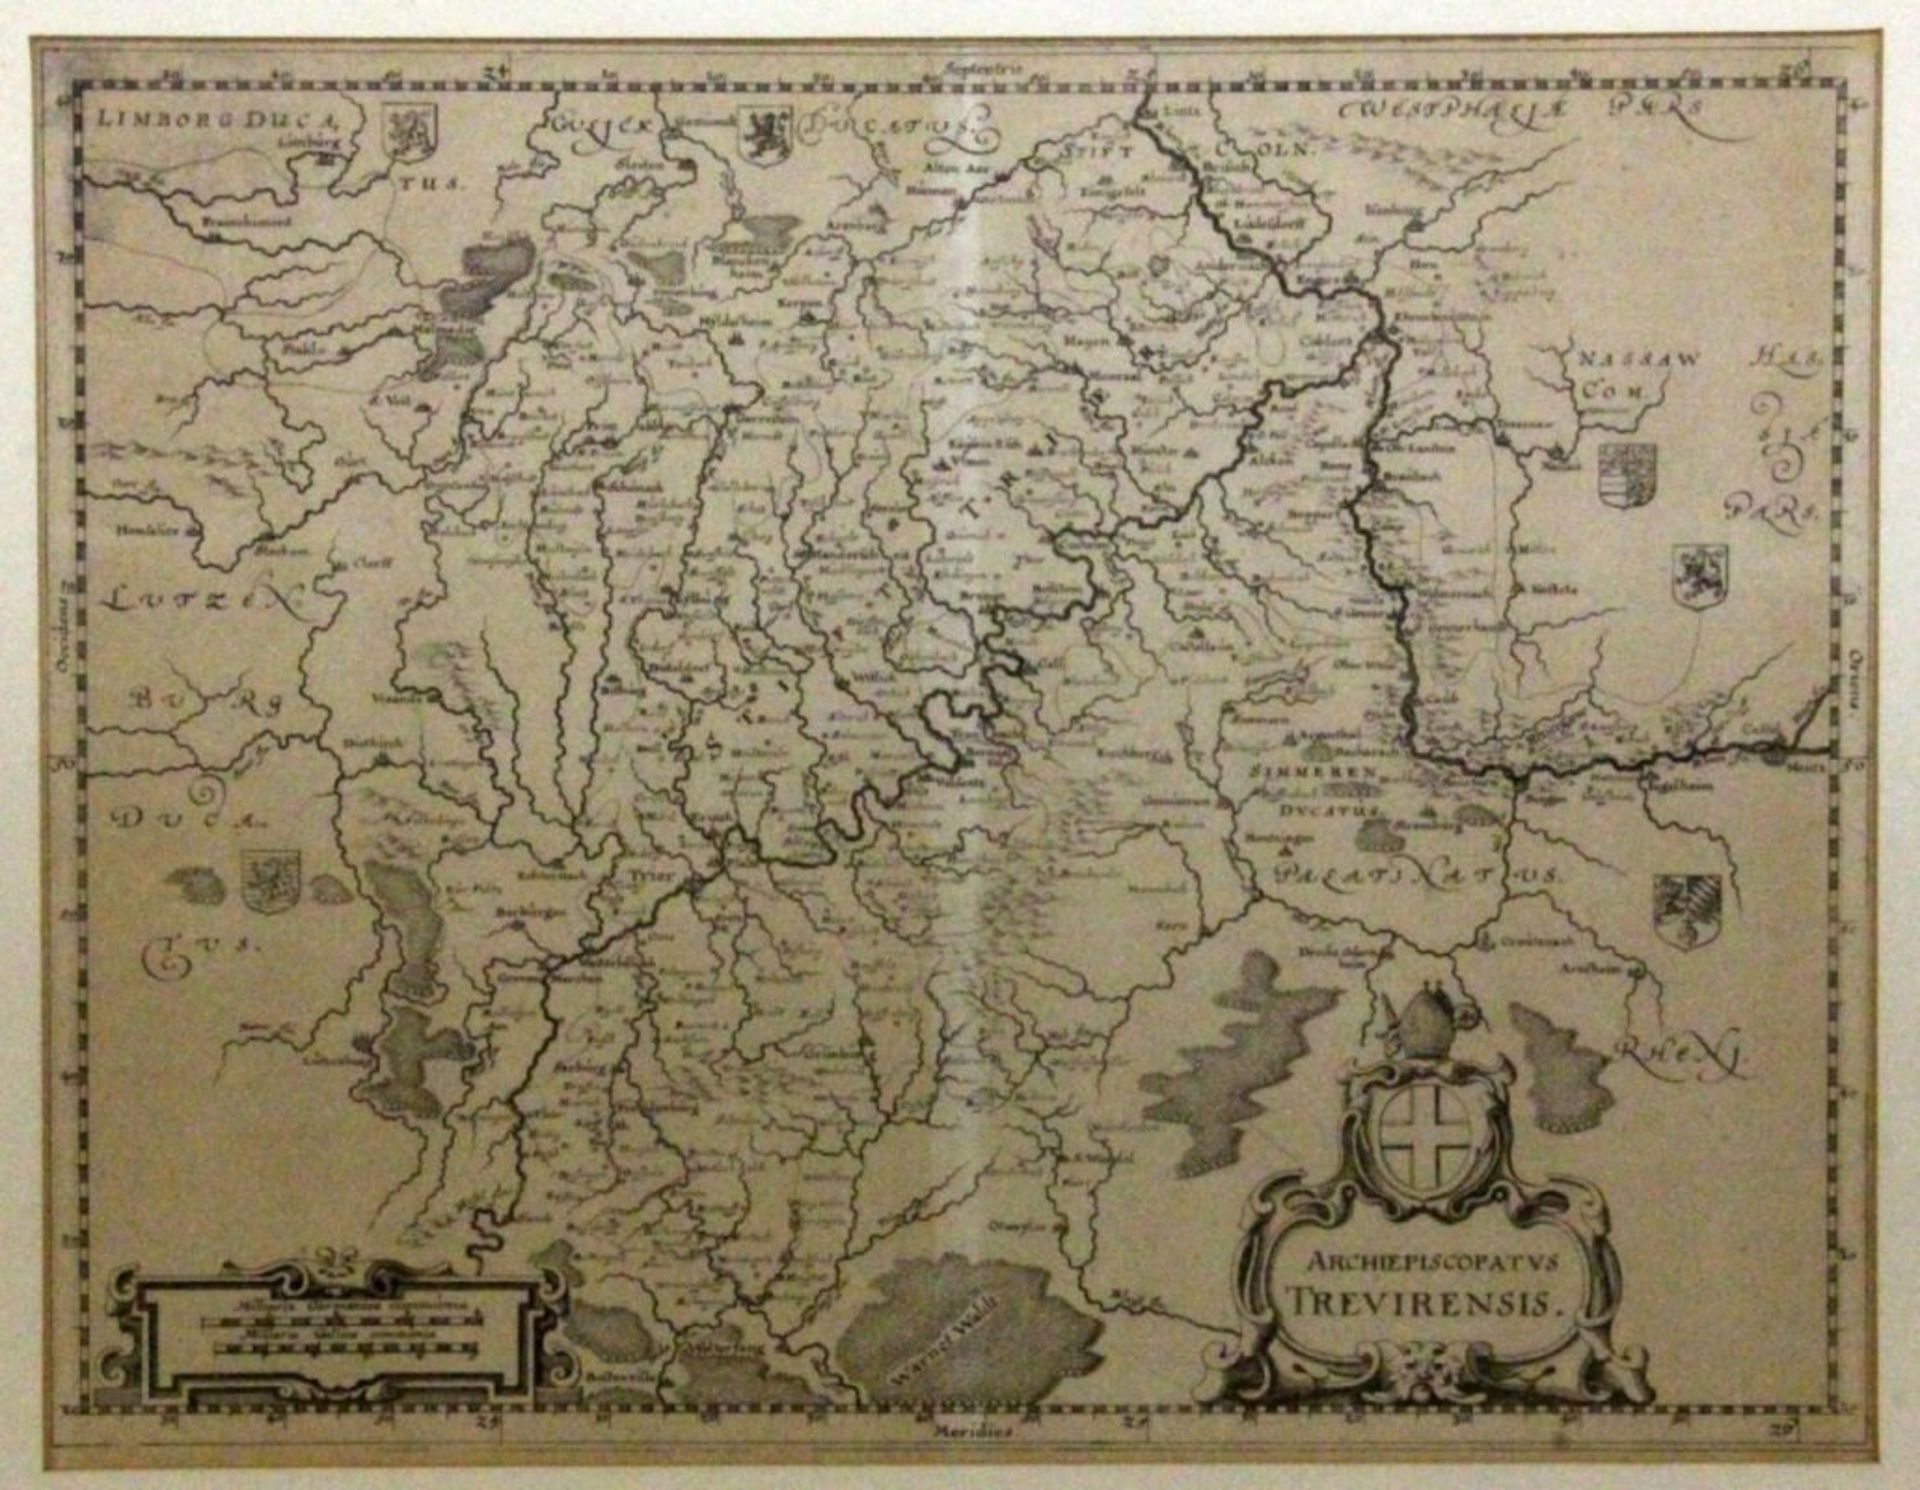 A COPPER PLATE ENGRAVING MAP OF TREVIRENSIS 18th century Moselle from Trier to Koblenz.